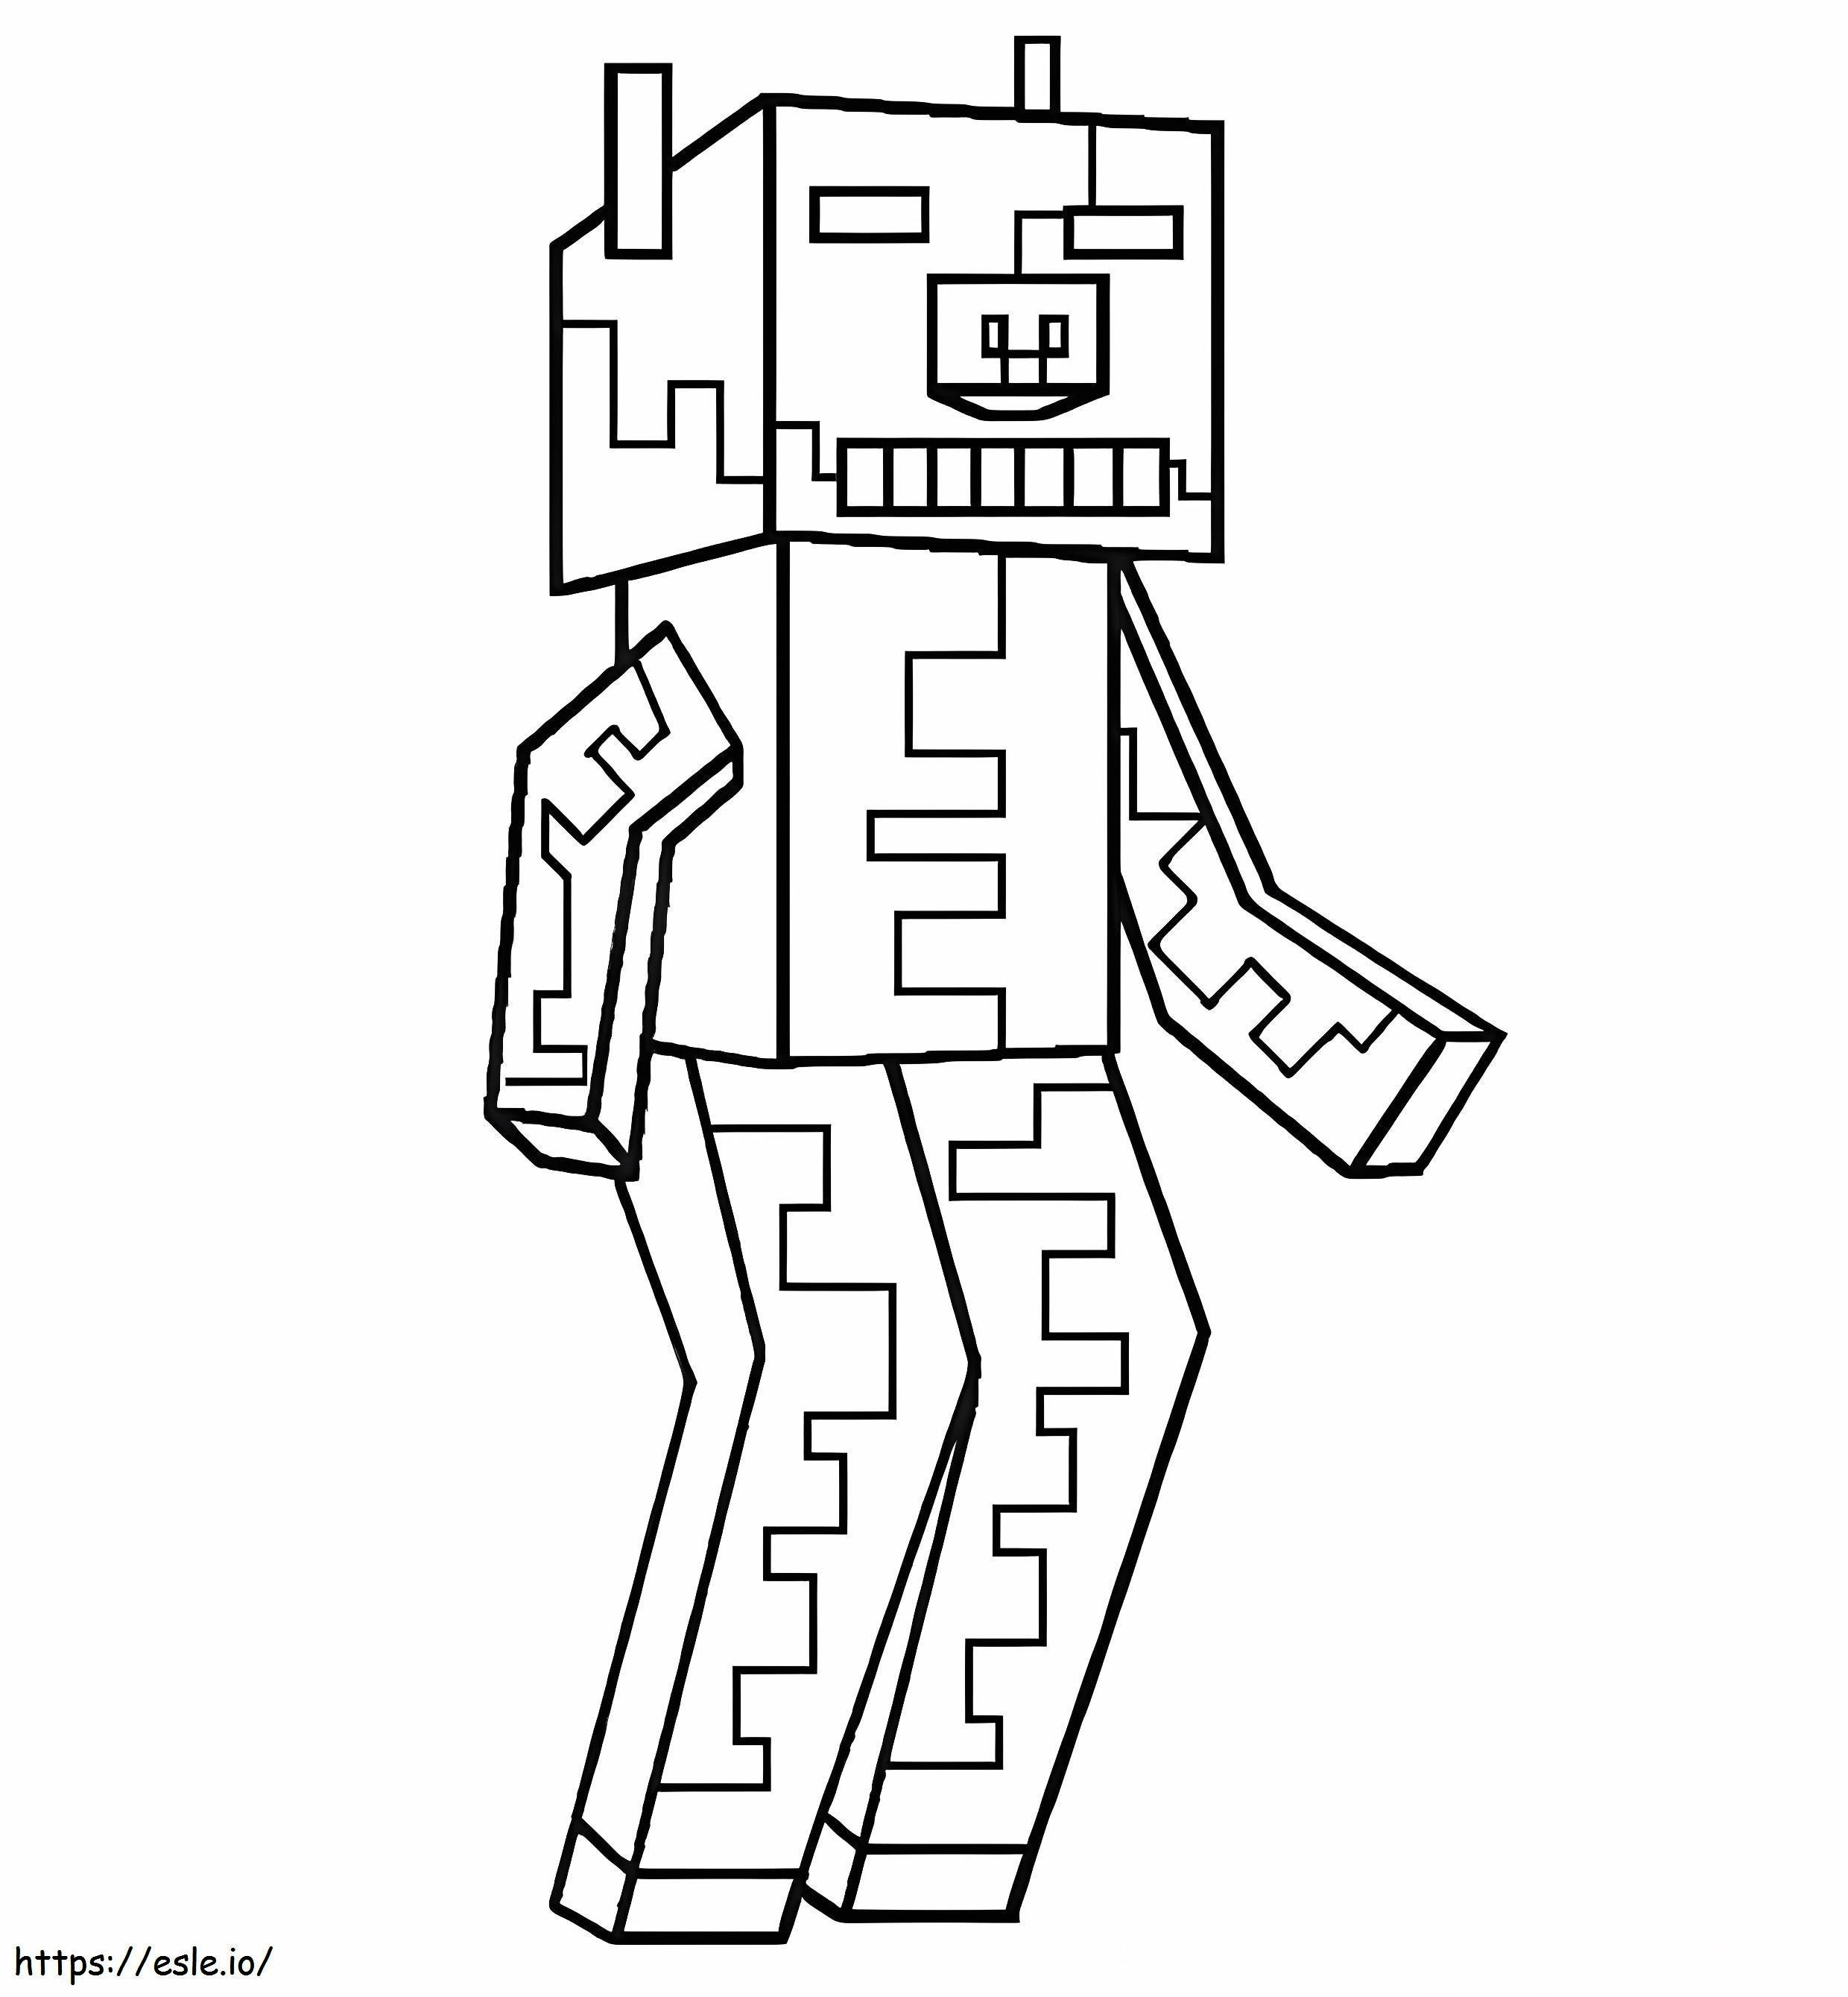 Minecraft Zombie Pig coloring page